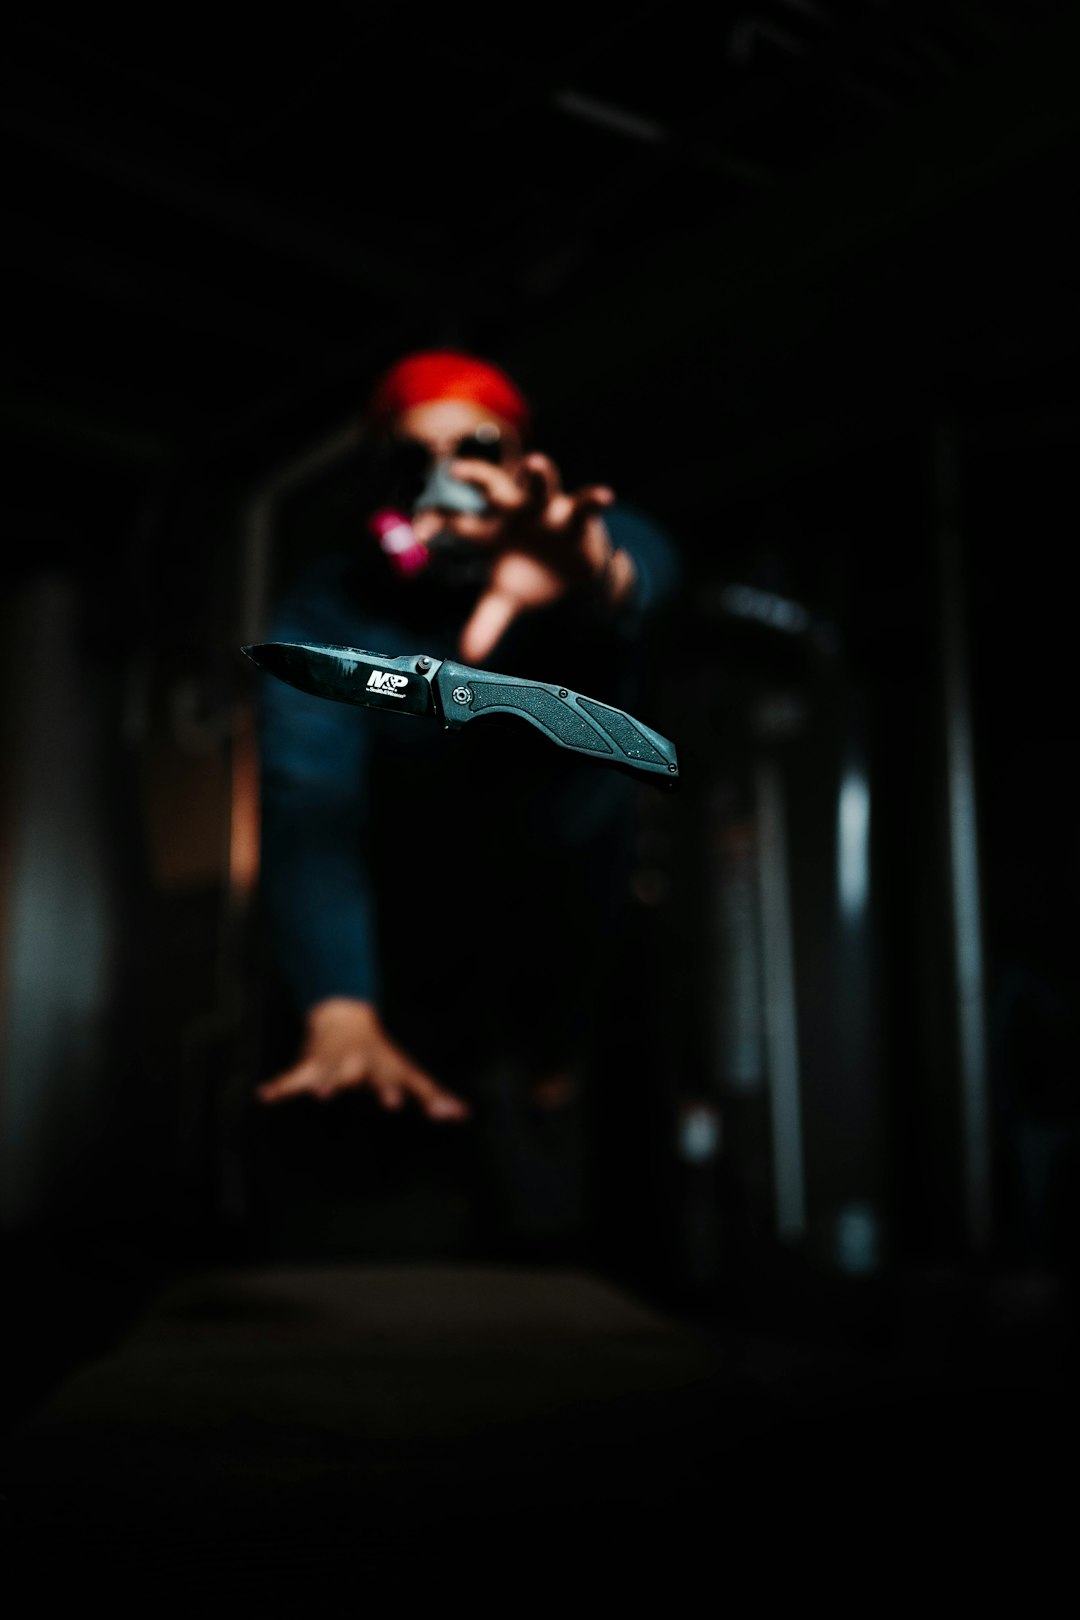 man in black and red mask holding black skateboard